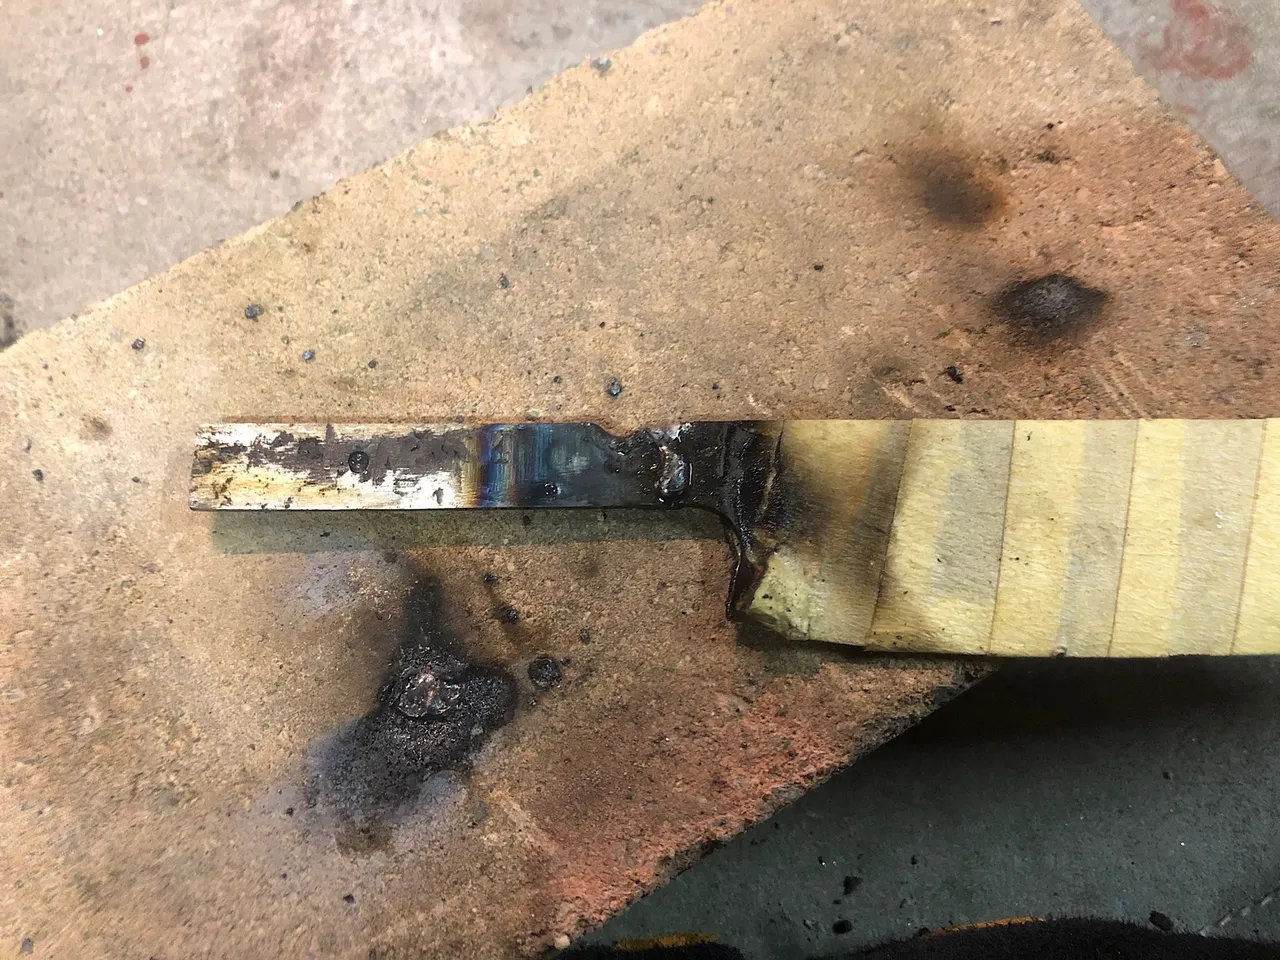 Stick welded the tang back to the knife